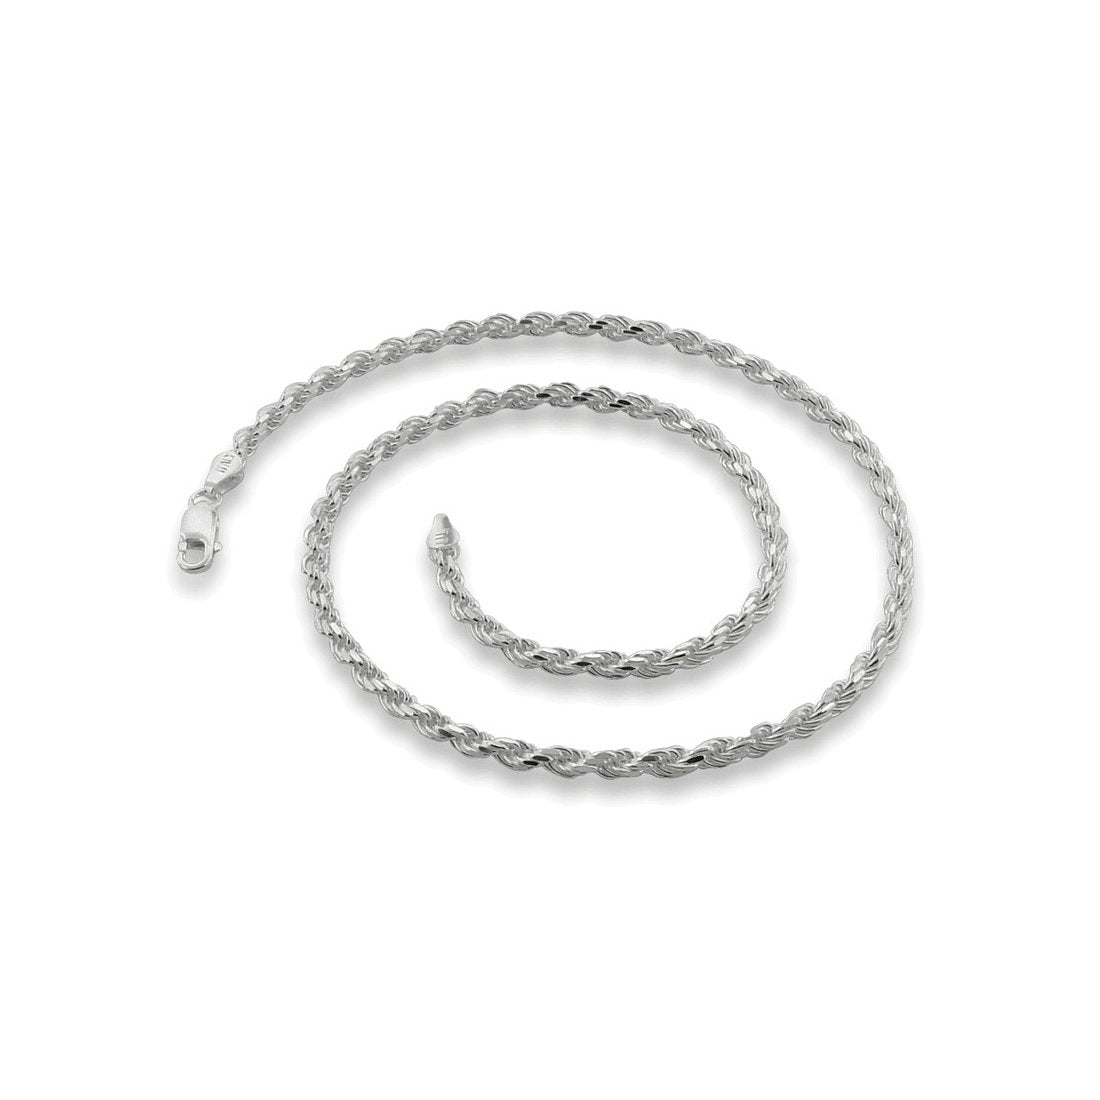 1.2MM 025 Rhodium Plated Rope Chain .925 Sterling Silver Length "16-30" Inches